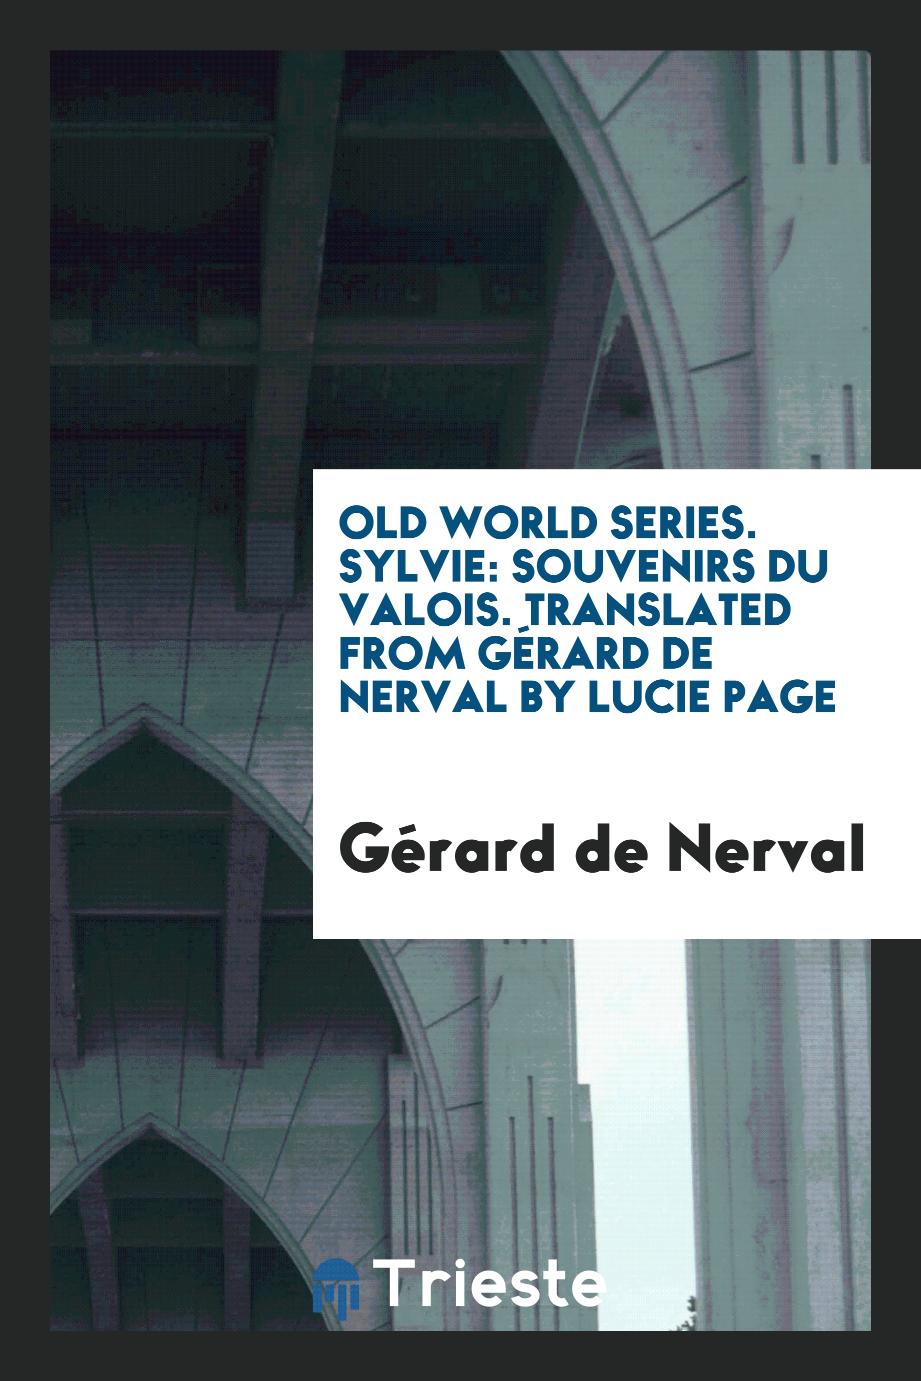 Old World Series. Sylvie: Souvenirs Du Valois. Translated from Gérard de Nerval by Lucie Page